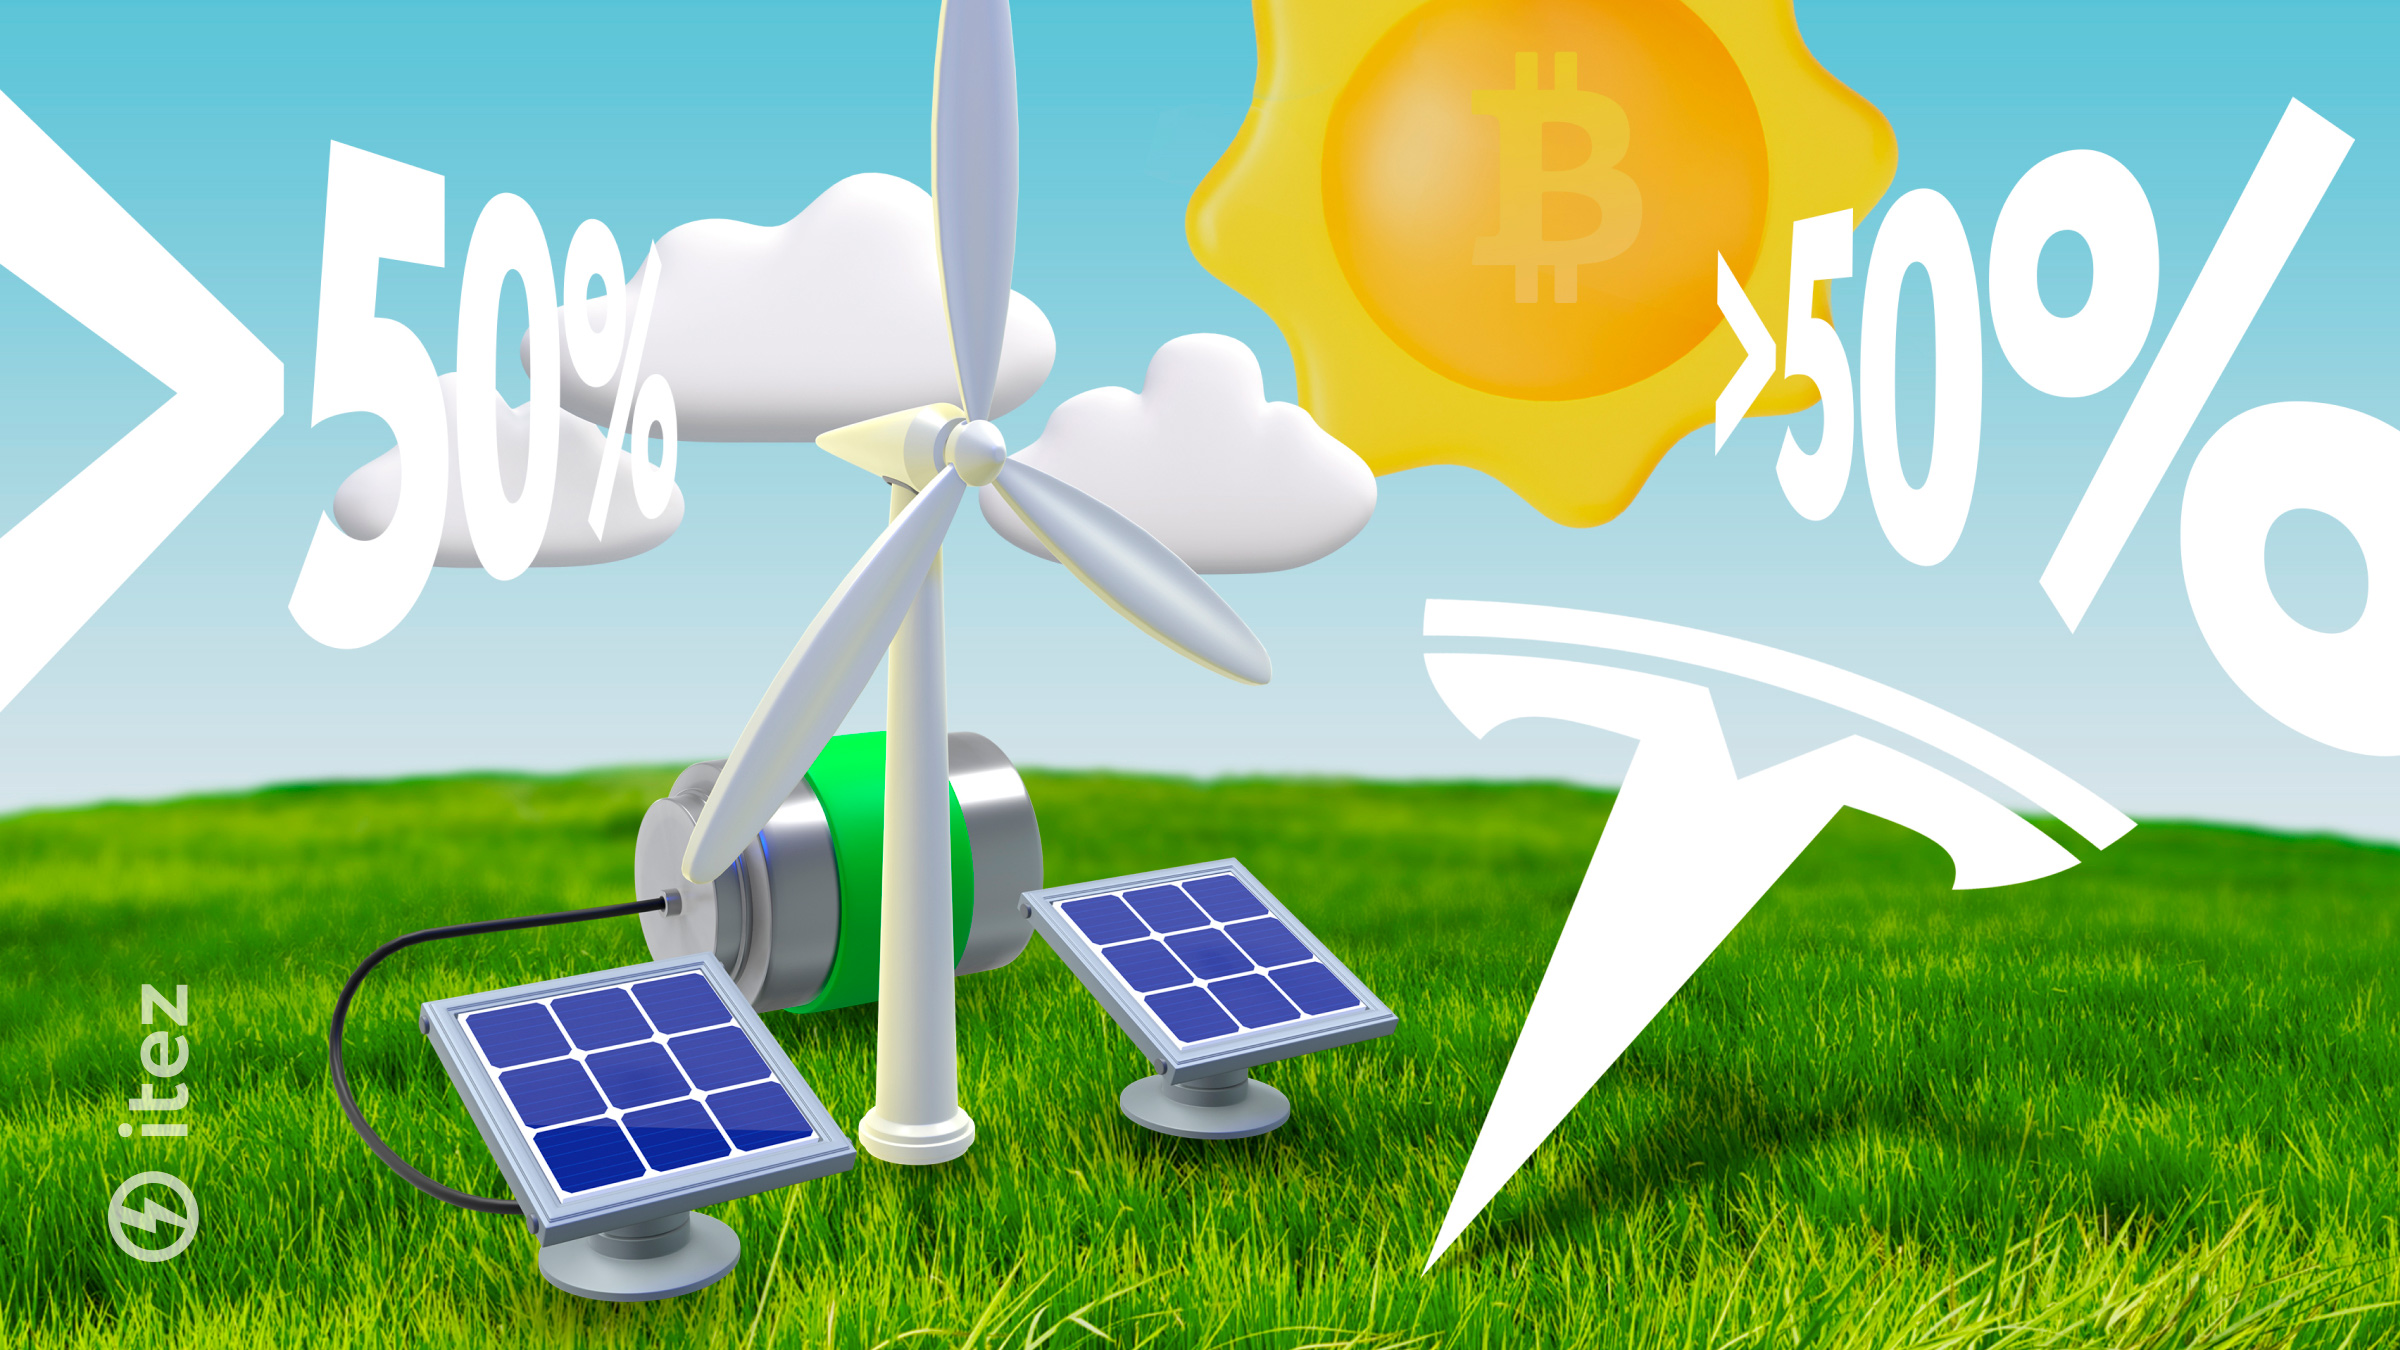 Over 50% of Bitcoin mining energy is clean